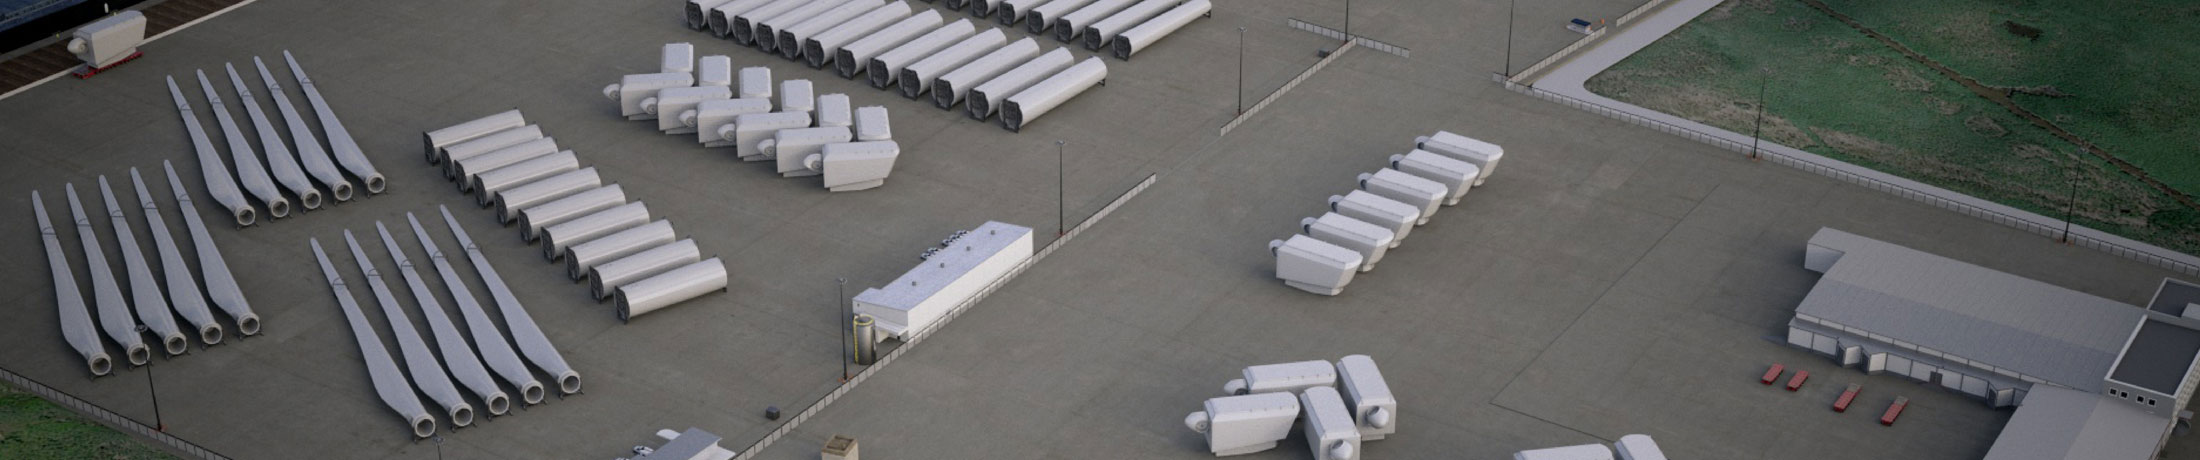 photo contains: Overhead view of manufacturing space with wind turbine blades, nacelles, and other components stored next to a facility. 